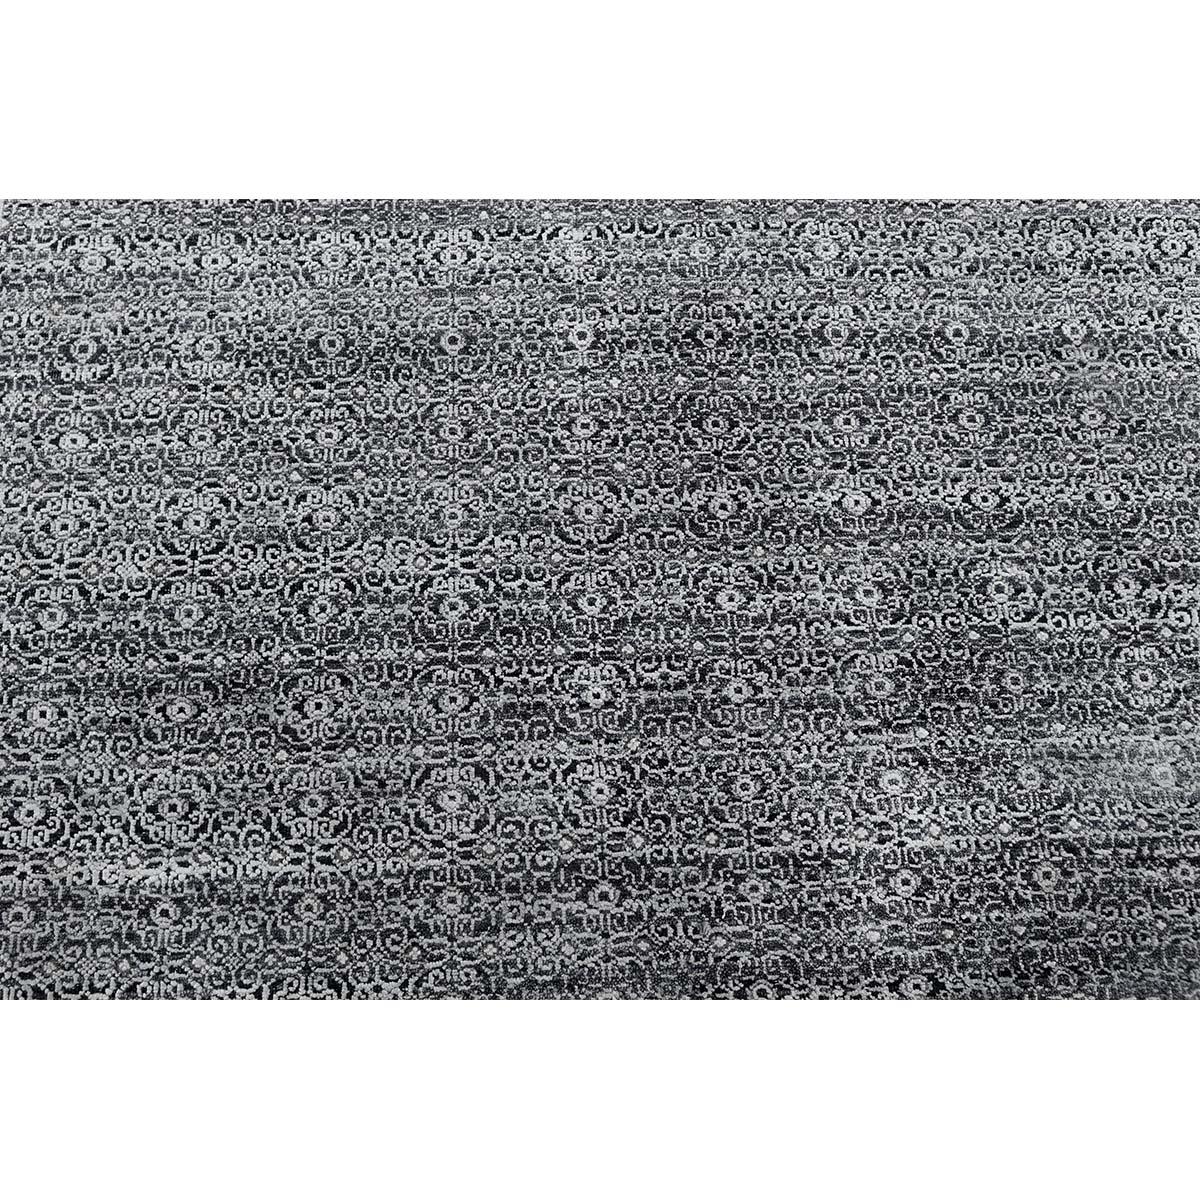 This elegantly hand woven rug is from India and woven from the finest wools and silks to create a soft and luxurious piece that will work well in so many different settings. Measures: 8' x 10'.
  